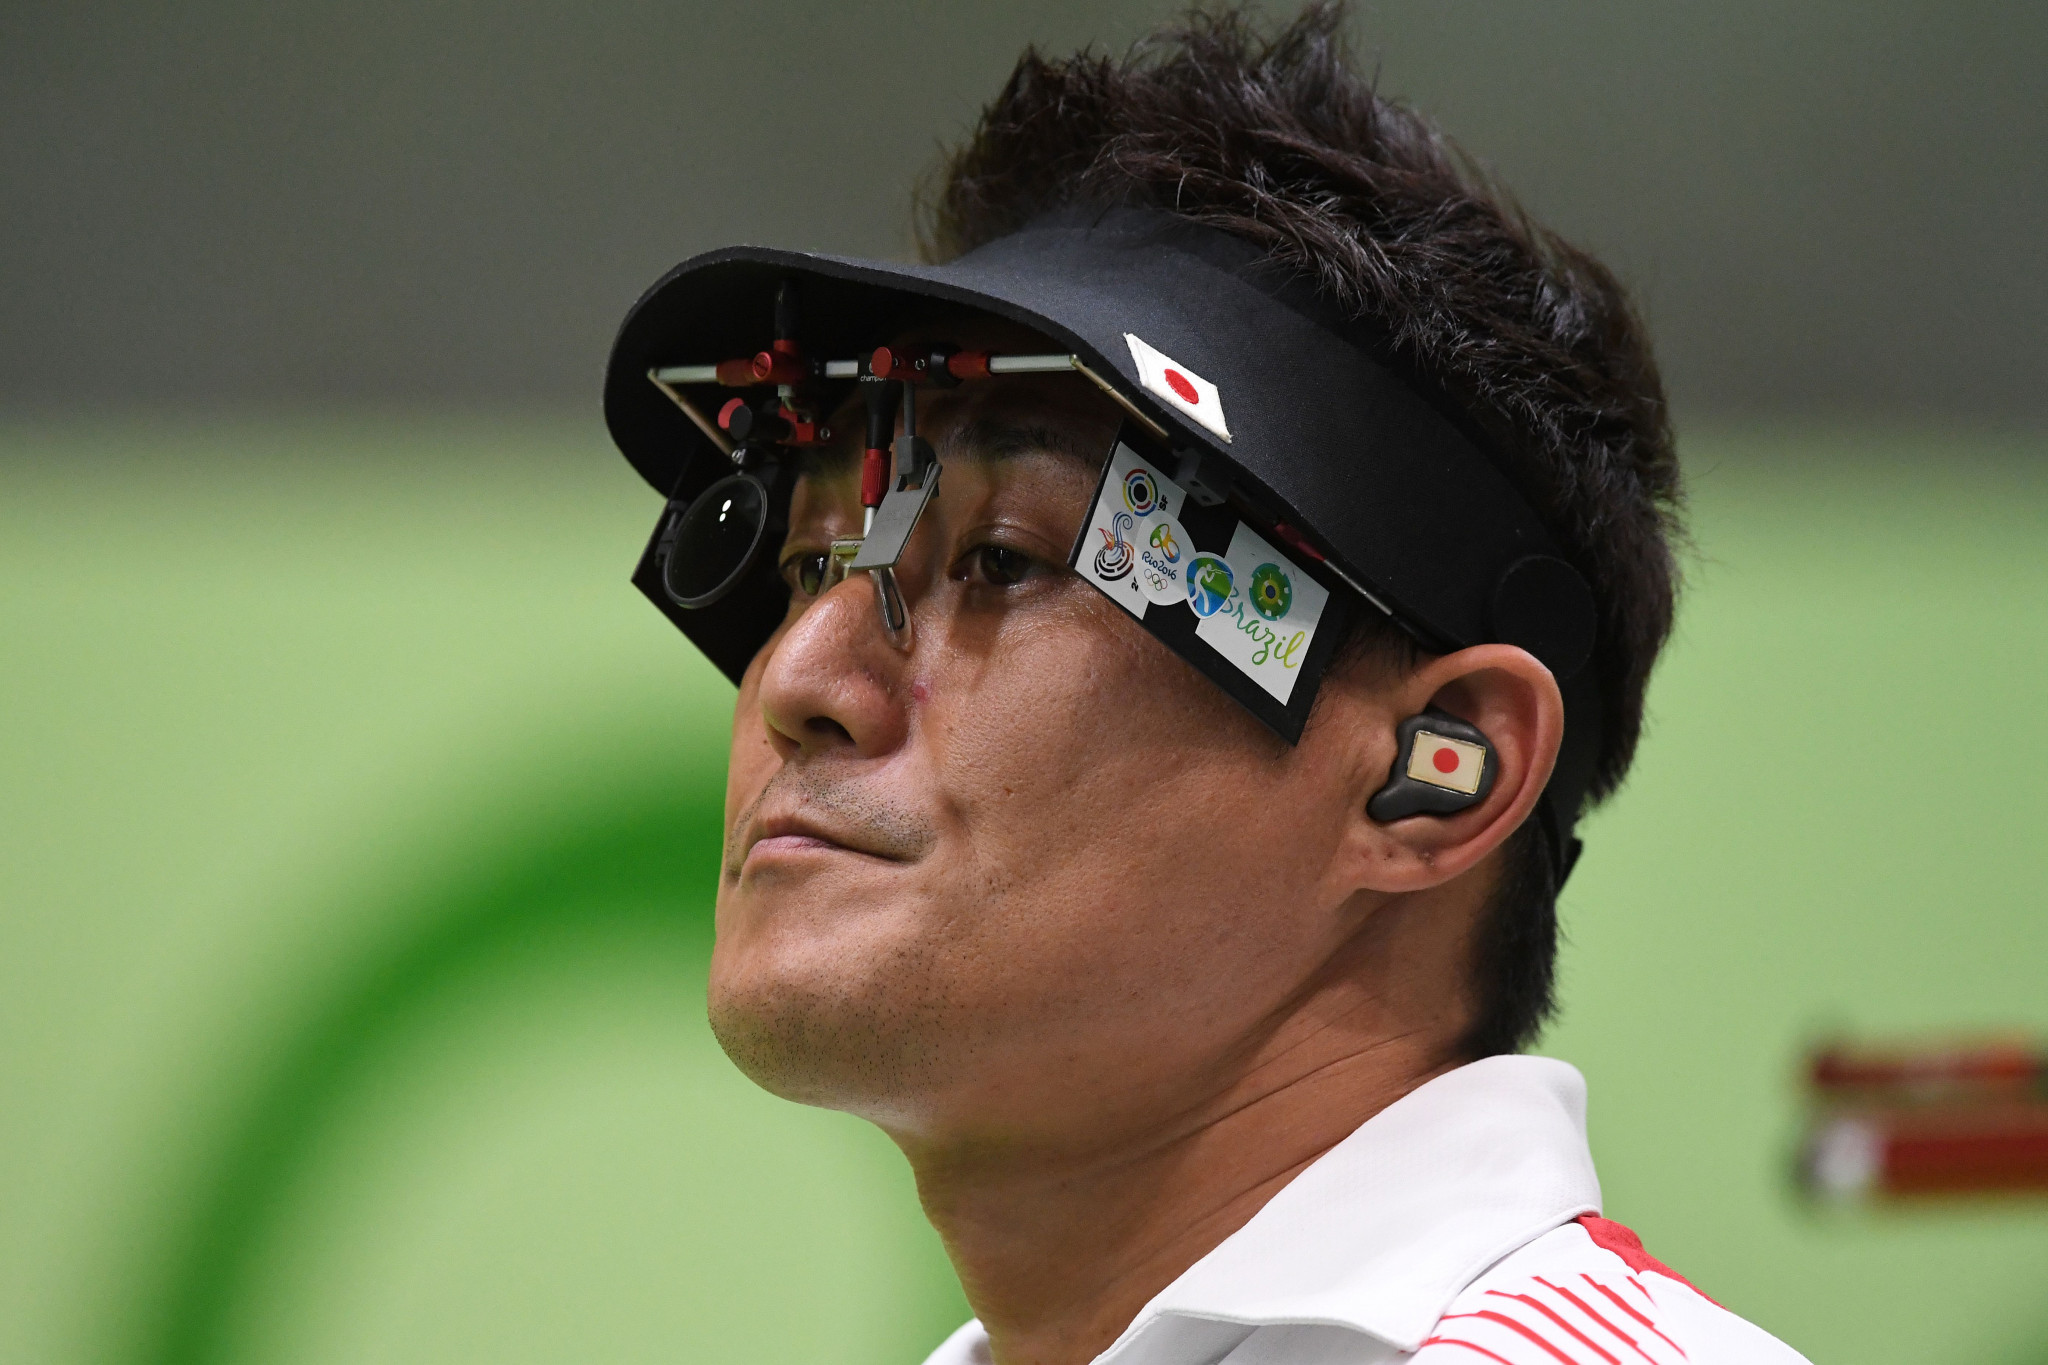 Matsuda Tomoyuki of Japan has been named male shooter of the year ©Getty Images 